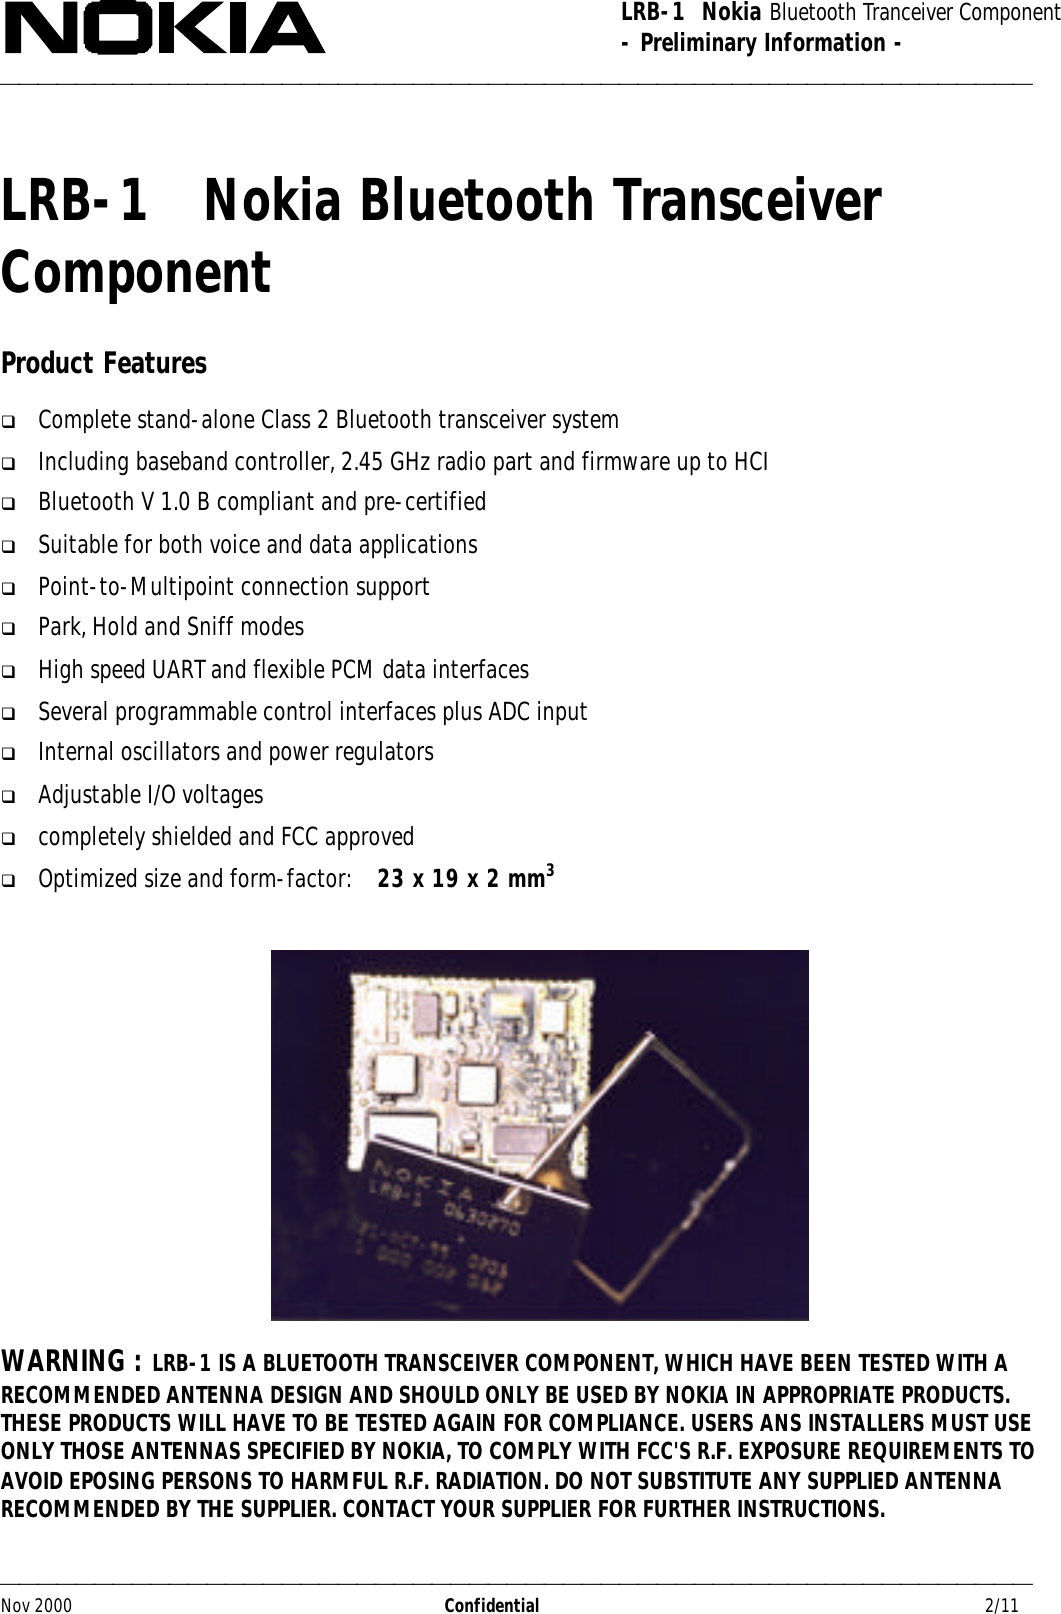 LRB-1  Nokia Bluetooth Tranceiver Component- Preliminary Information -Nov 2000                  Confidential                                         2/11LRB-1   Nokia Bluetooth TransceiverComponentProduct Featuresq Complete stand-alone Class 2 Bluetooth transceiver systemq Including baseband controller, 2.45 GHz radio part and firmware up to HCIq Bluetooth V 1.0 B compliant and pre-certifiedq Suitable for both voice and data applicationsq Point-to-Multipoint connection supportq Park, Hold and Sniff modesq High speed UART and flexible PCM data interfacesq Several programmable control interfaces plus ADC inputq Internal oscillators and power regulatorsq Adjustable I/O voltagesq completely shielded and FCC approvedq Optimized size and form-factor:    23 x 19 x 2 mm3WARNING : LRB-1 IS A BLUETOOTH TRANSCEIVER COMPONENT, WHICH HAVE BEEN TESTED WITH ARECOMMENDED ANTENNA DESIGN AND SHOULD ONLY BE USED BY NOKIA IN APPROPRIATE PRODUCTS.THESE PRODUCTS WILL HAVE TO BE TESTED AGAIN FOR COMPLIANCE. USERS ANS INSTALLERS MUST USEONLY THOSE ANTENNAS SPECIFIED BY NOKIA, TO COMPLY WITH FCC&apos;S R.F. EXPOSURE REQUIREMENTS TOAVOID EPOSING PERSONS TO HARMFUL R.F. RADIATION. DO NOT SUBSTITUTE ANY SUPPLIED ANTENNARECOMMENDED BY THE SUPPLIER. CONTACT YOUR SUPPLIER FOR FURTHER INSTRUCTIONS.